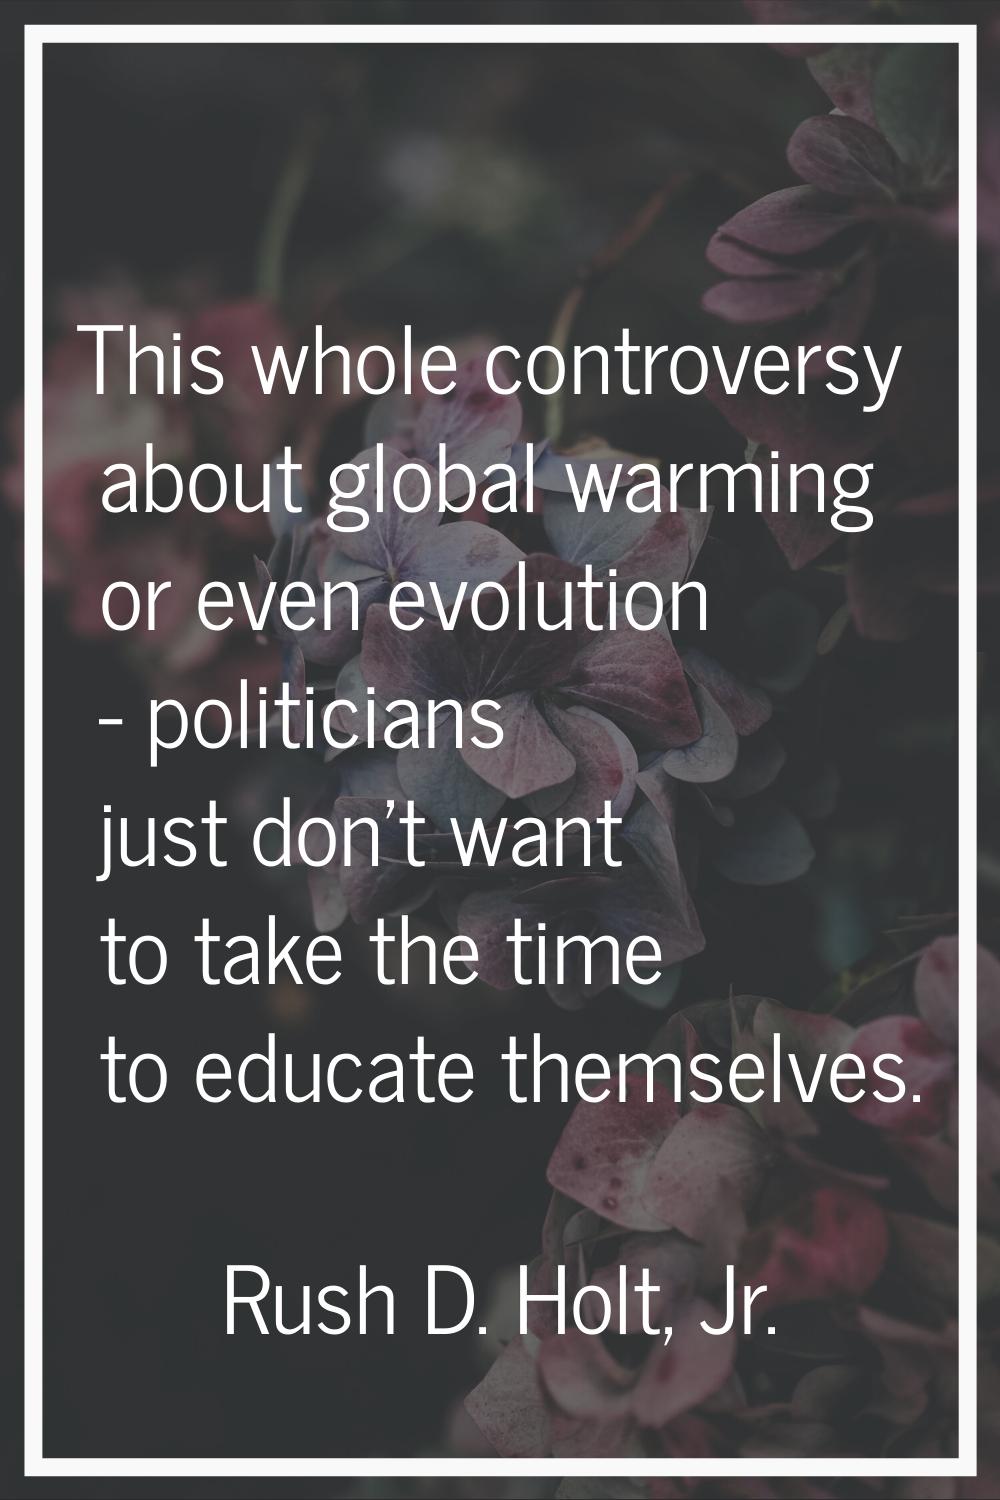 This whole controversy about global warming or even evolution - politicians just don't want to take